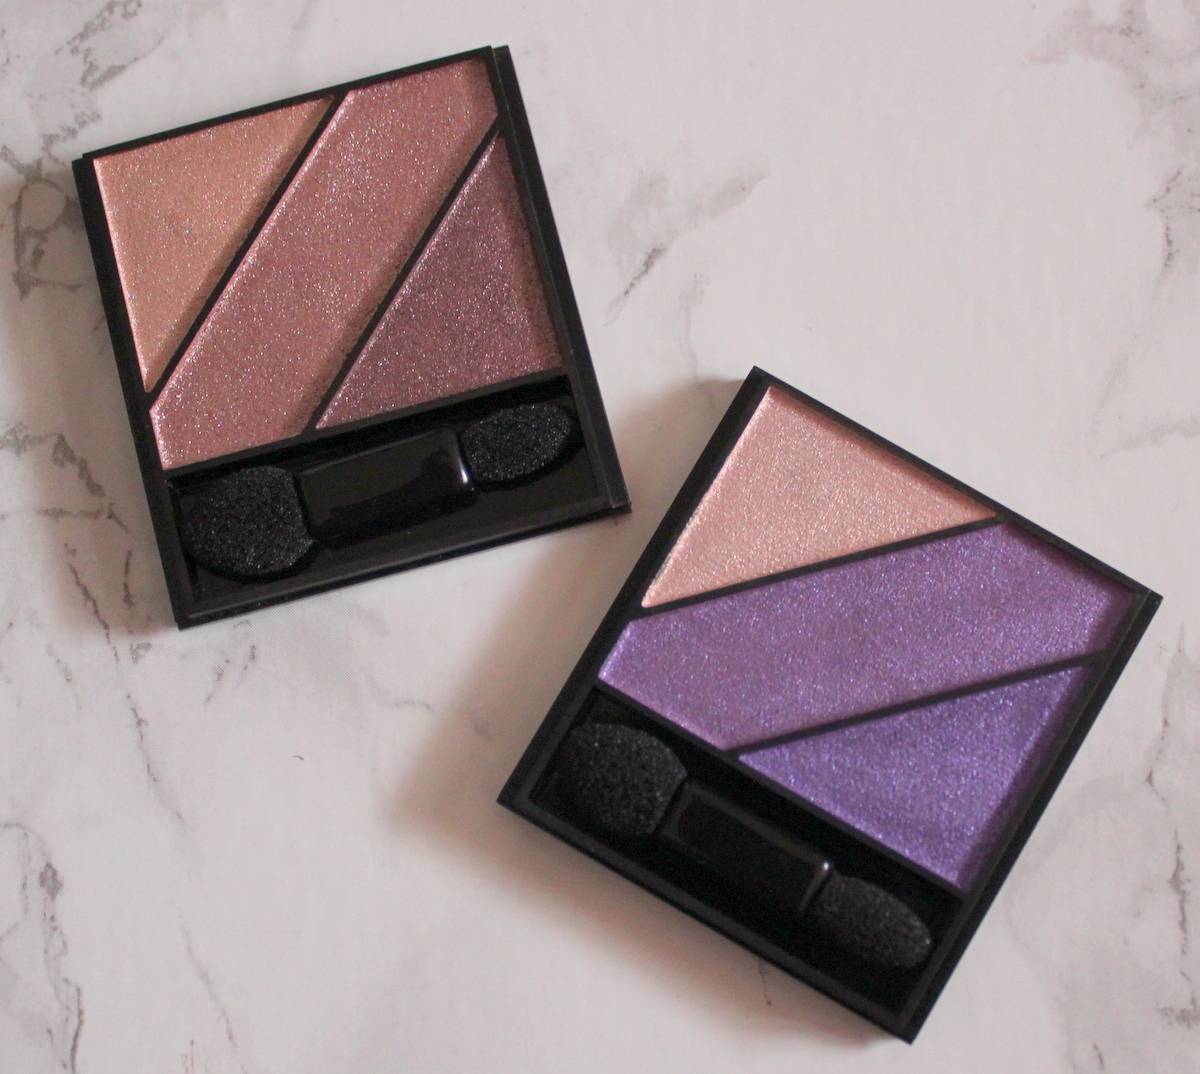 Elizabeth Arden Eyes Wide Shut Touch of Lavender and Forever Plum Palettes